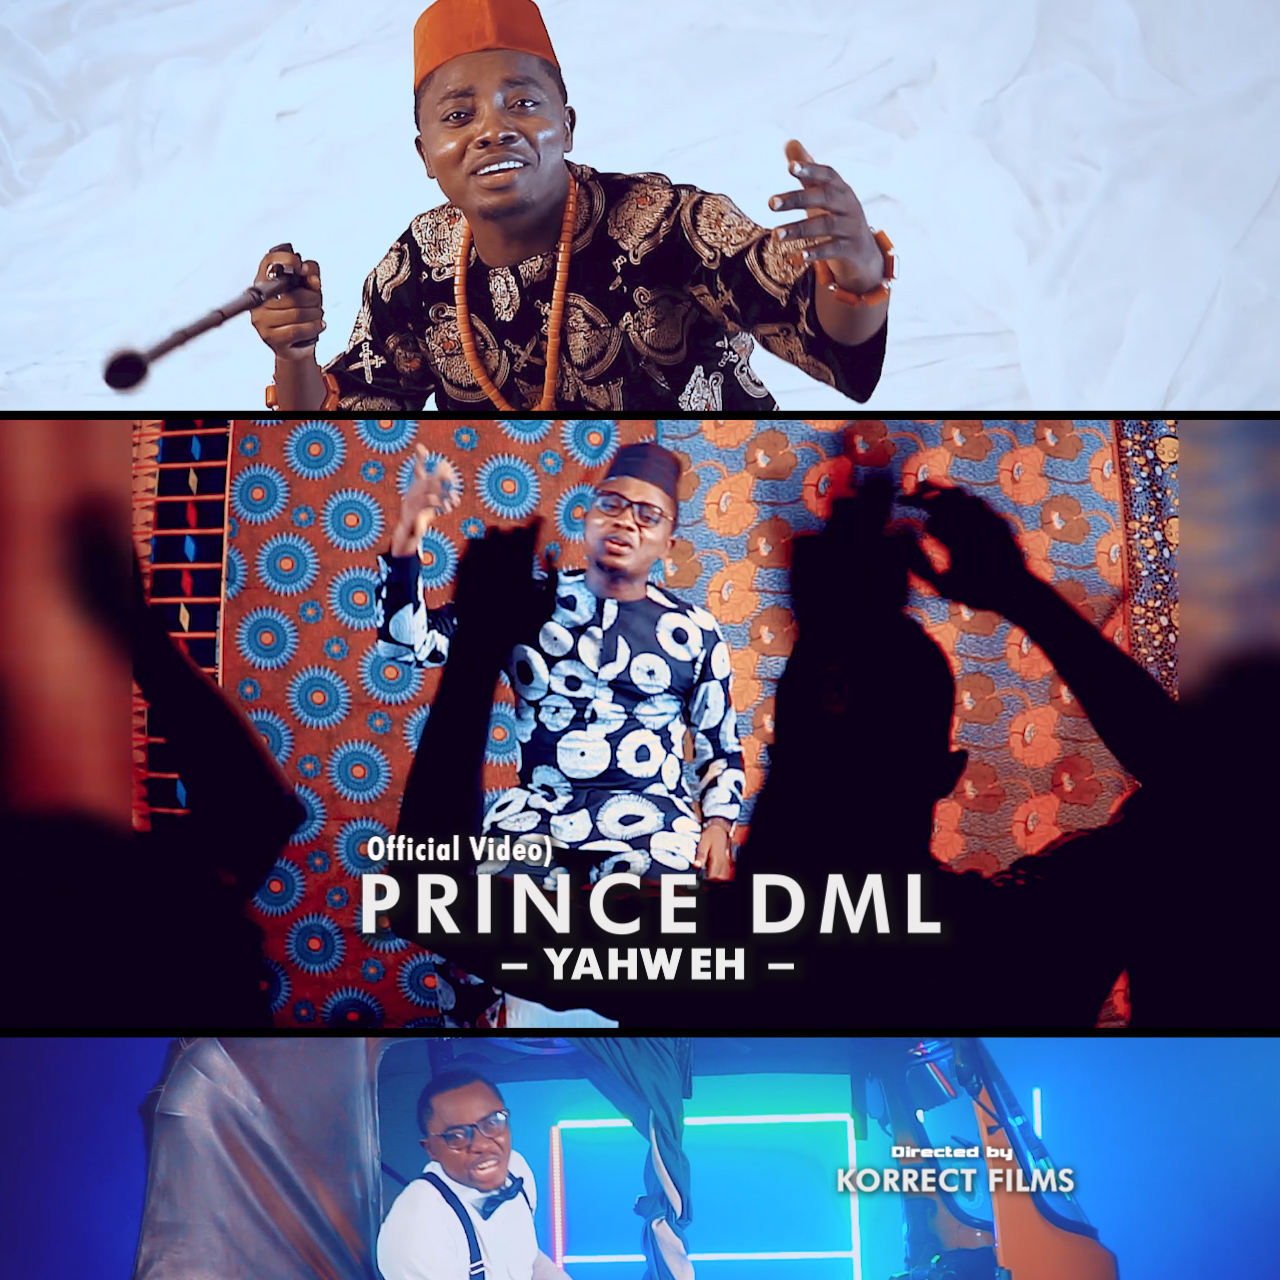 Official Video: Prince DML - Yahweh |